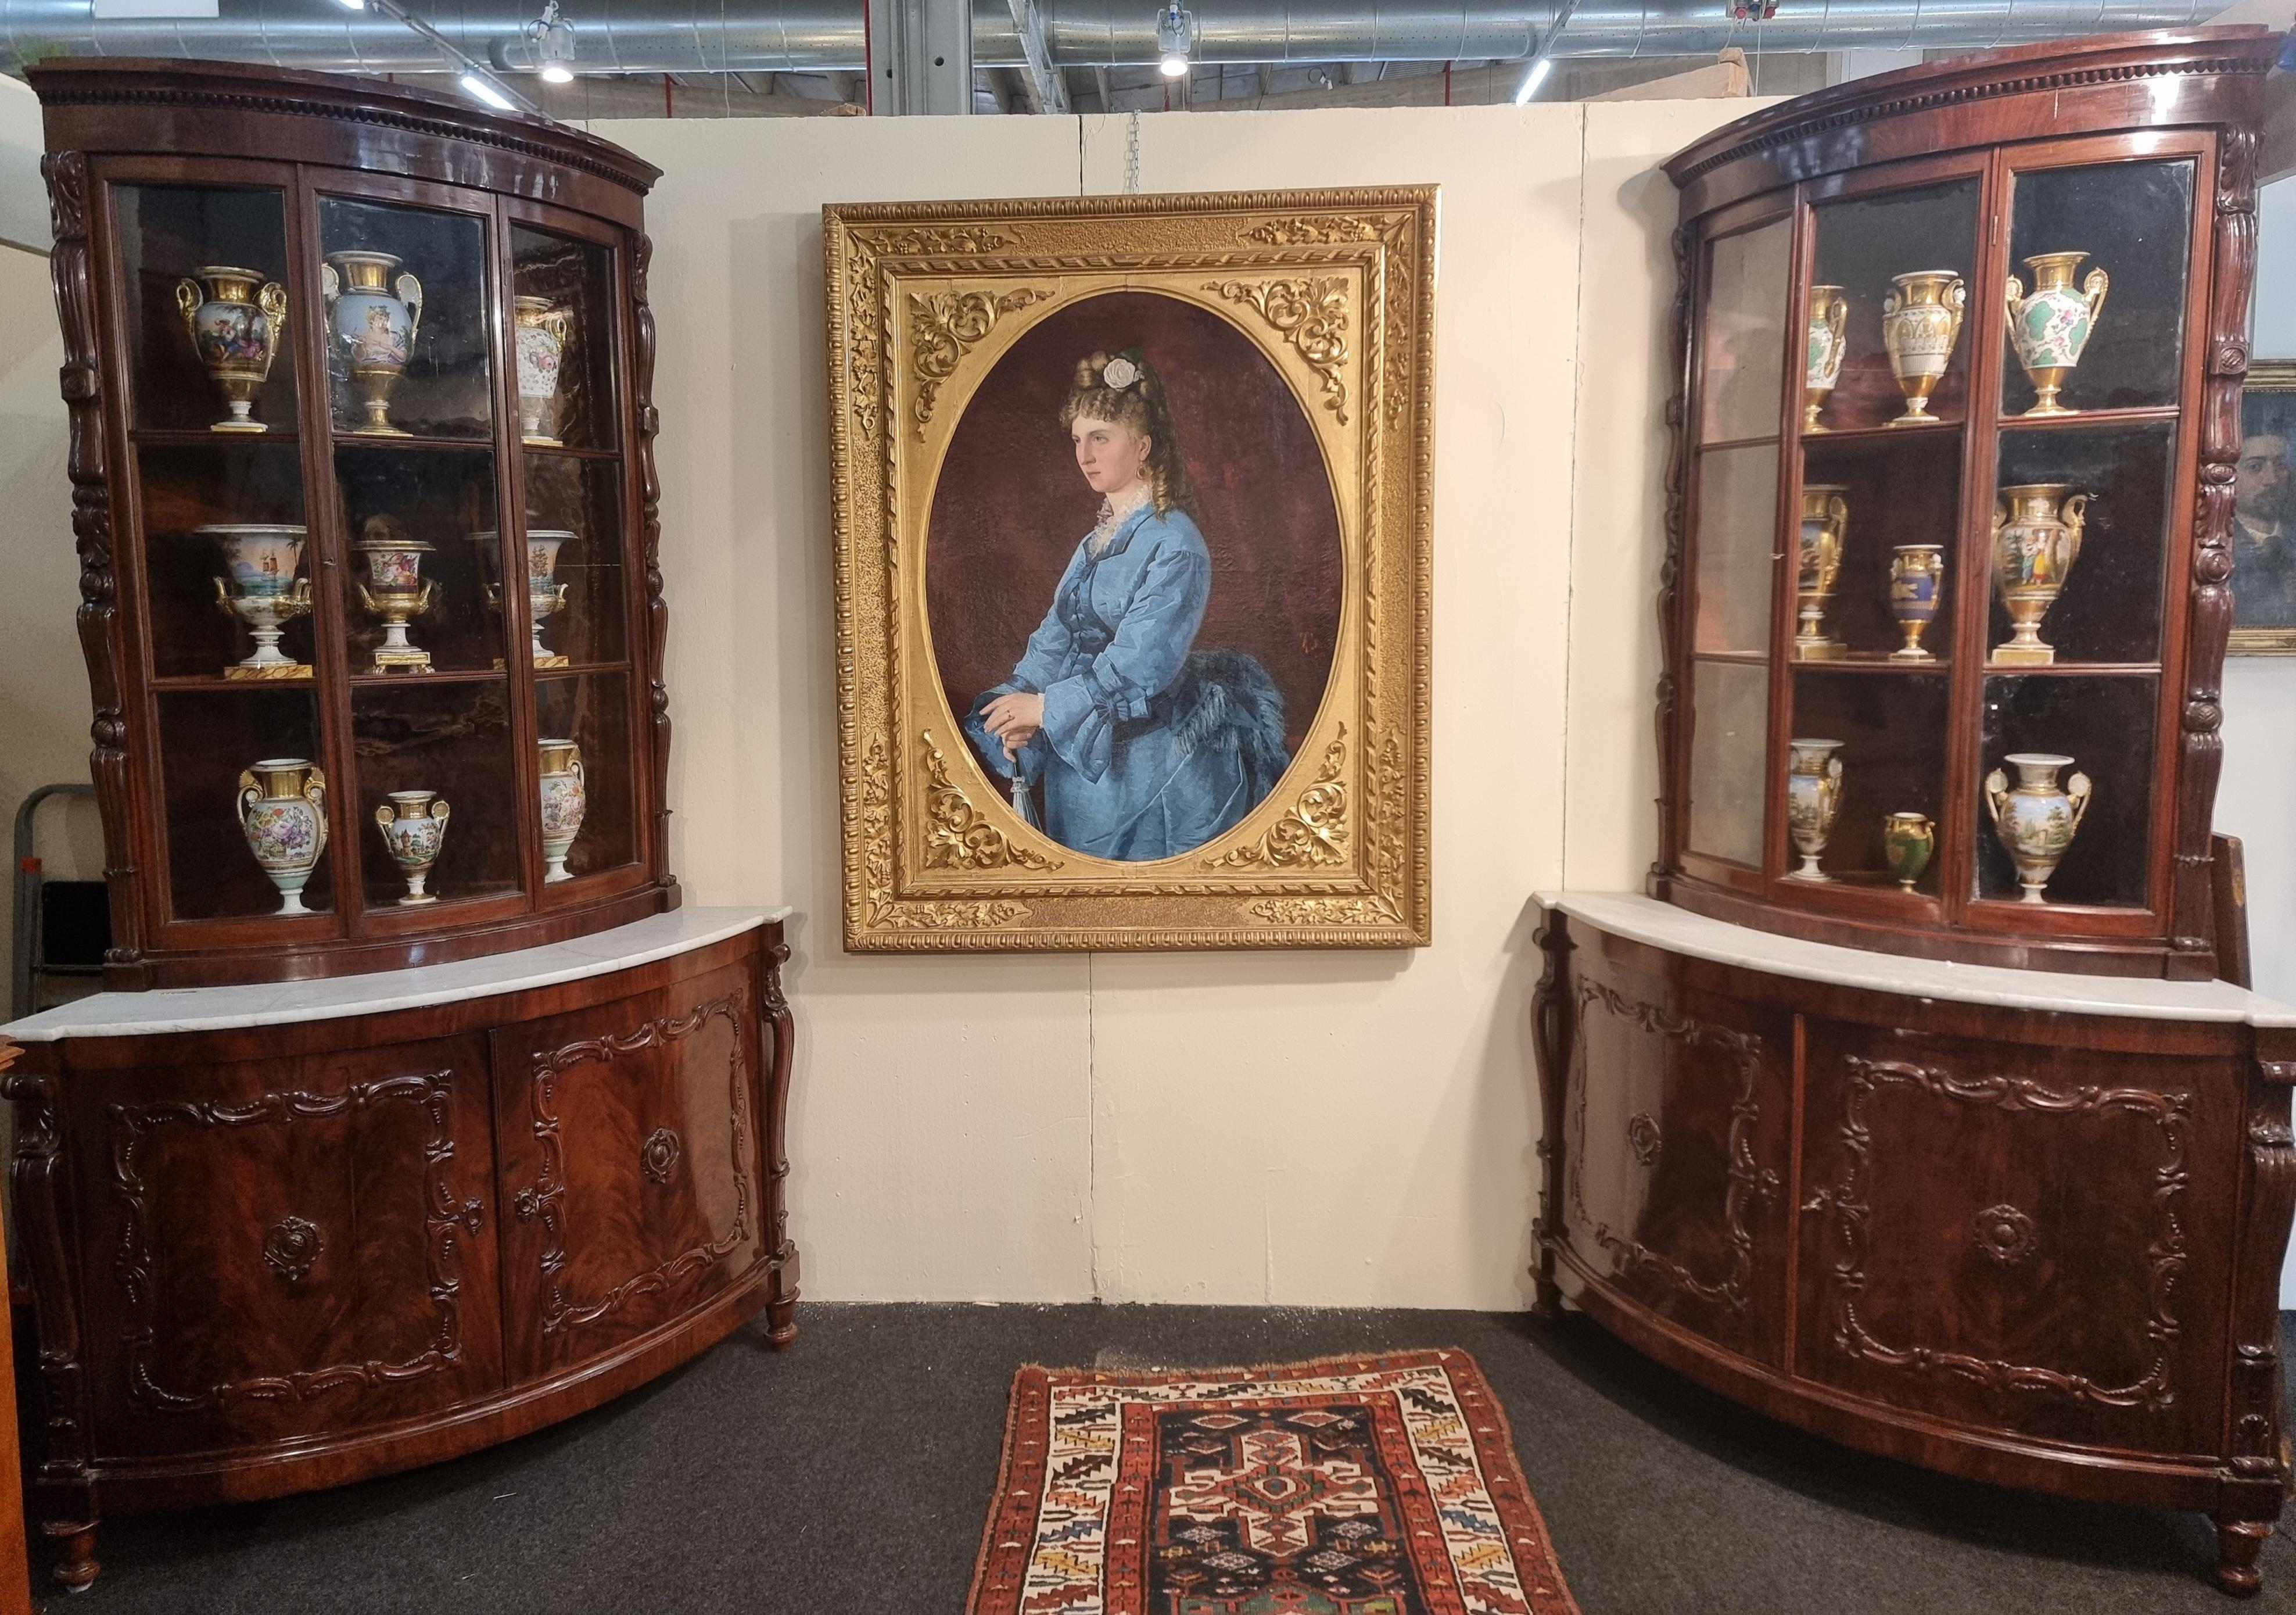 Splendid pair of Livorno corner cupboards from the second half of the 19th century in mahogany wood with original patina. the two corner units have tops in white Carrara marble. On the sides they have carved friezes, the lower part has two rounded